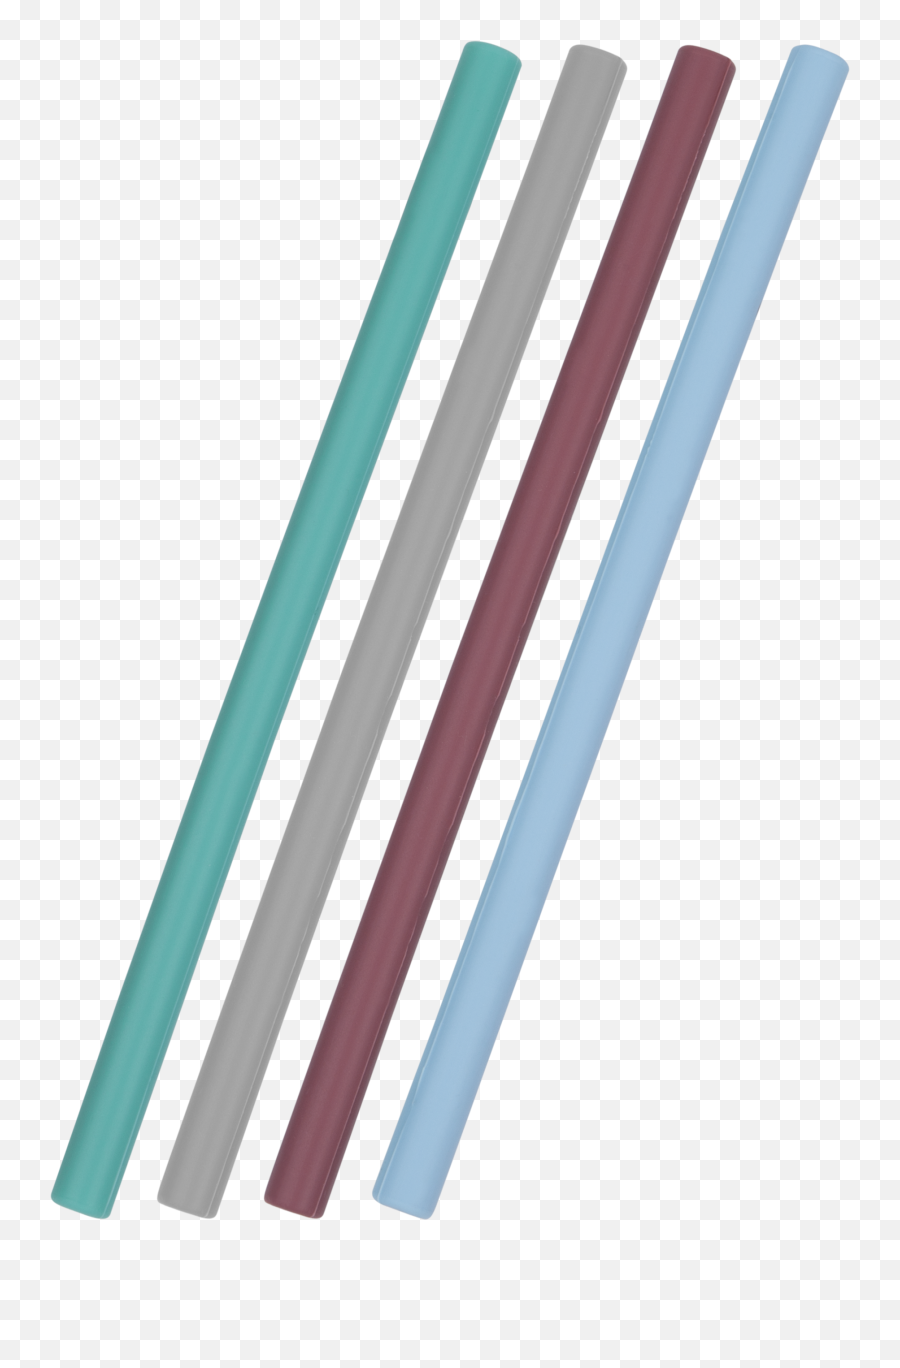 Minikoioi Flexi Straws - Minikoioi Flexi Straw Png,Straw Png